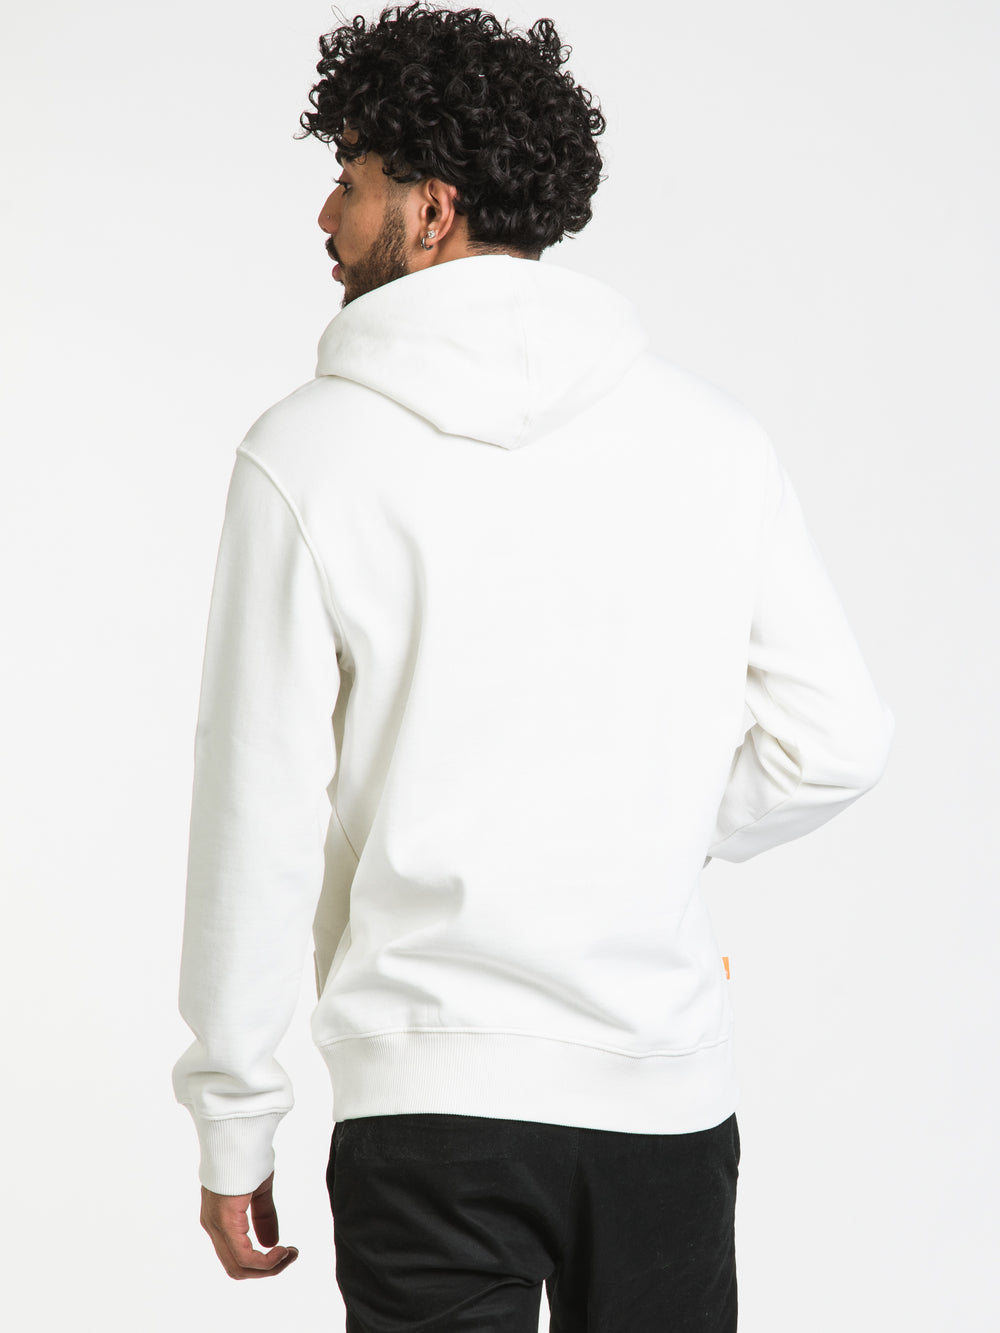 TIMBERLAND CORE TREE LOGO PULLOVER HOODIE - CLEARANCE